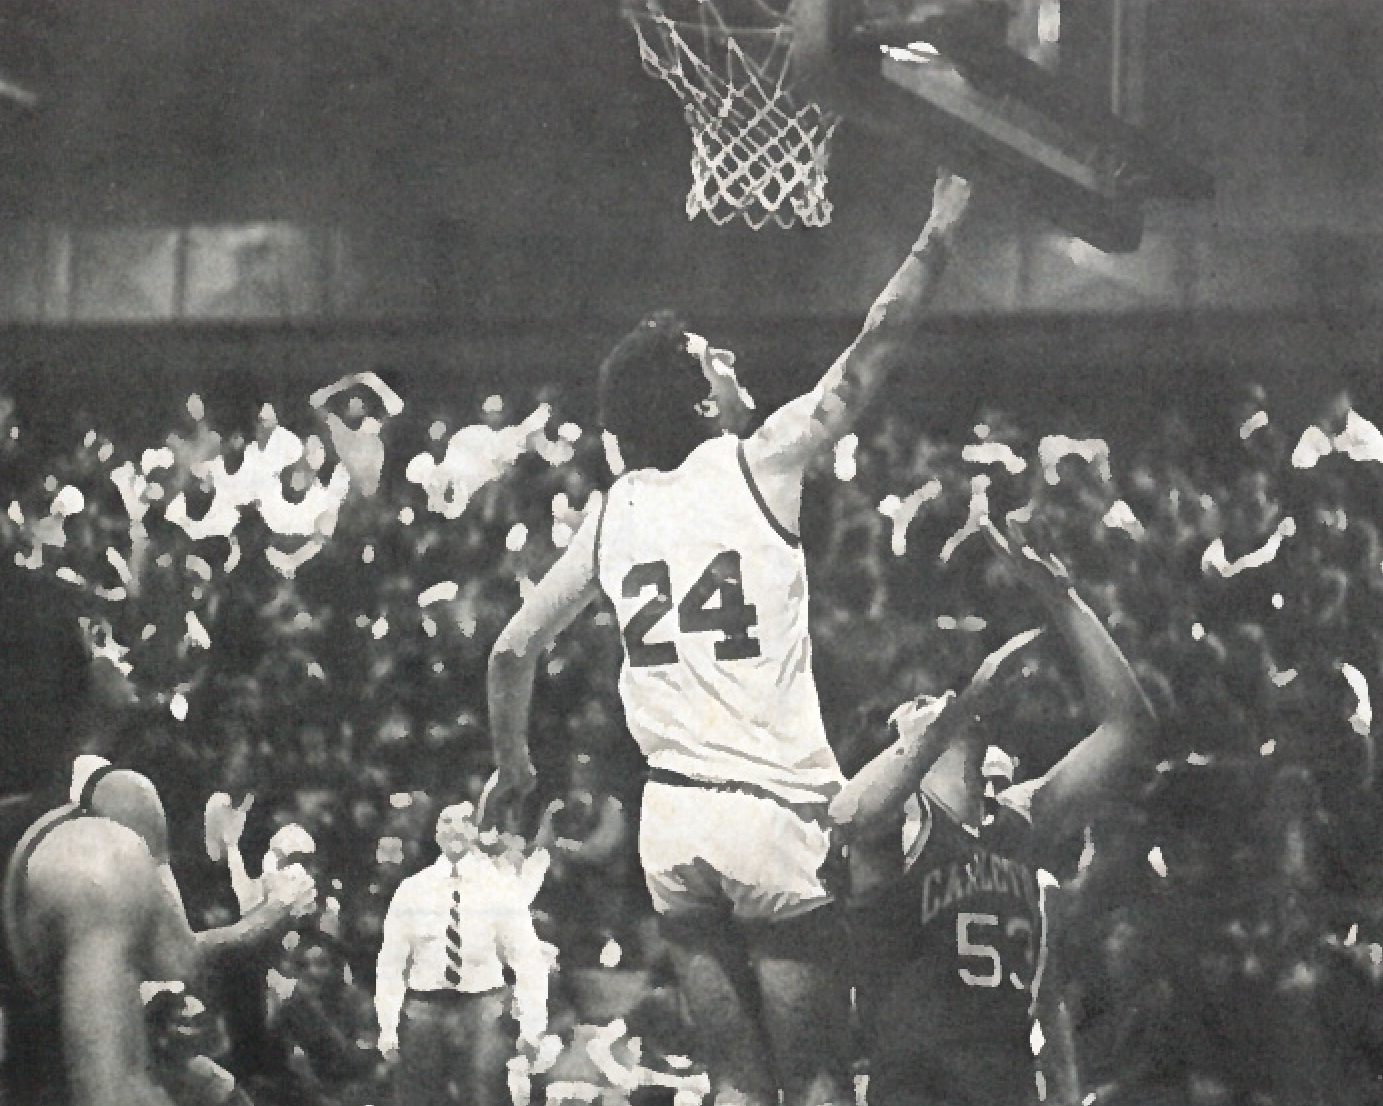 Black and white photo of a basketball player doing a layup in front of a crowd